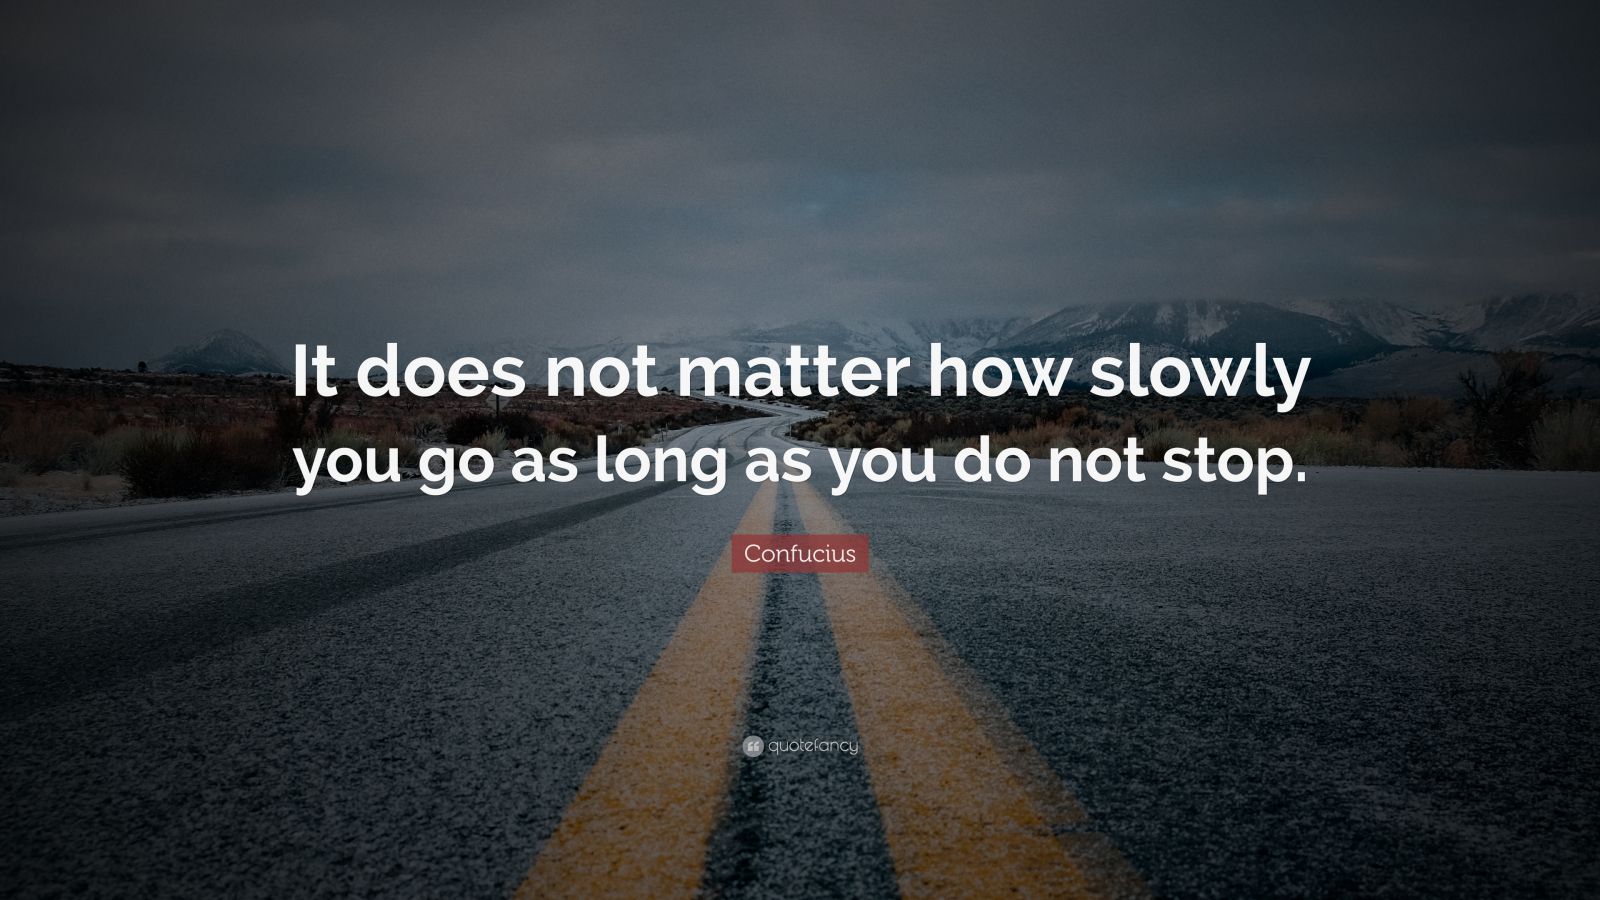 Confucius Quote: “It does not matter how slowly you go as long as you